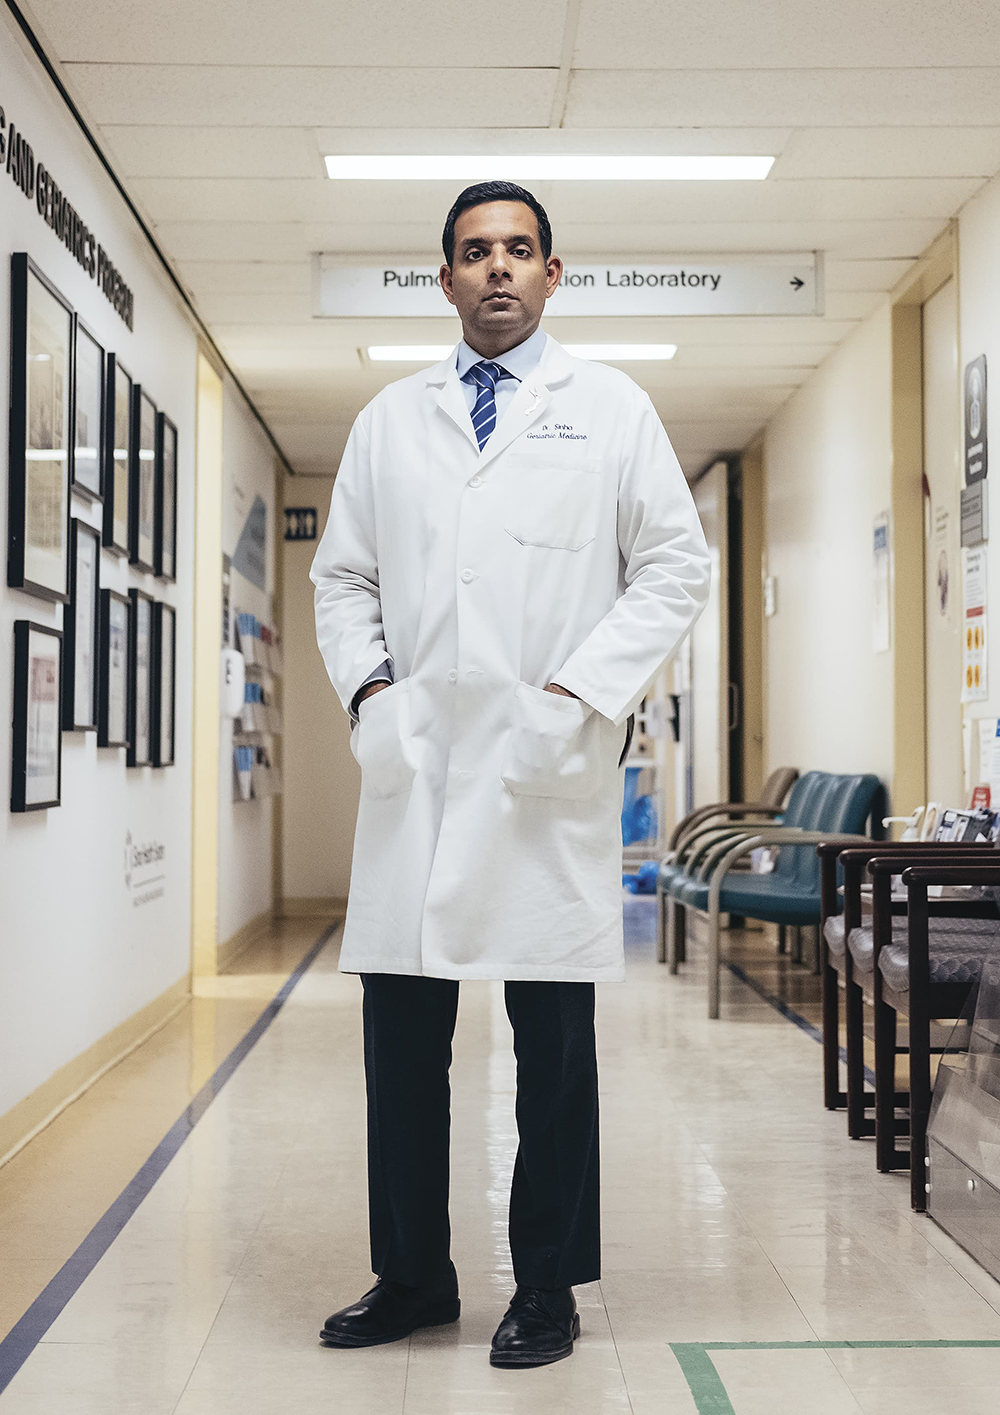 Dr. Samir Sinha stands wearing a white lab coat in the hospital hallway